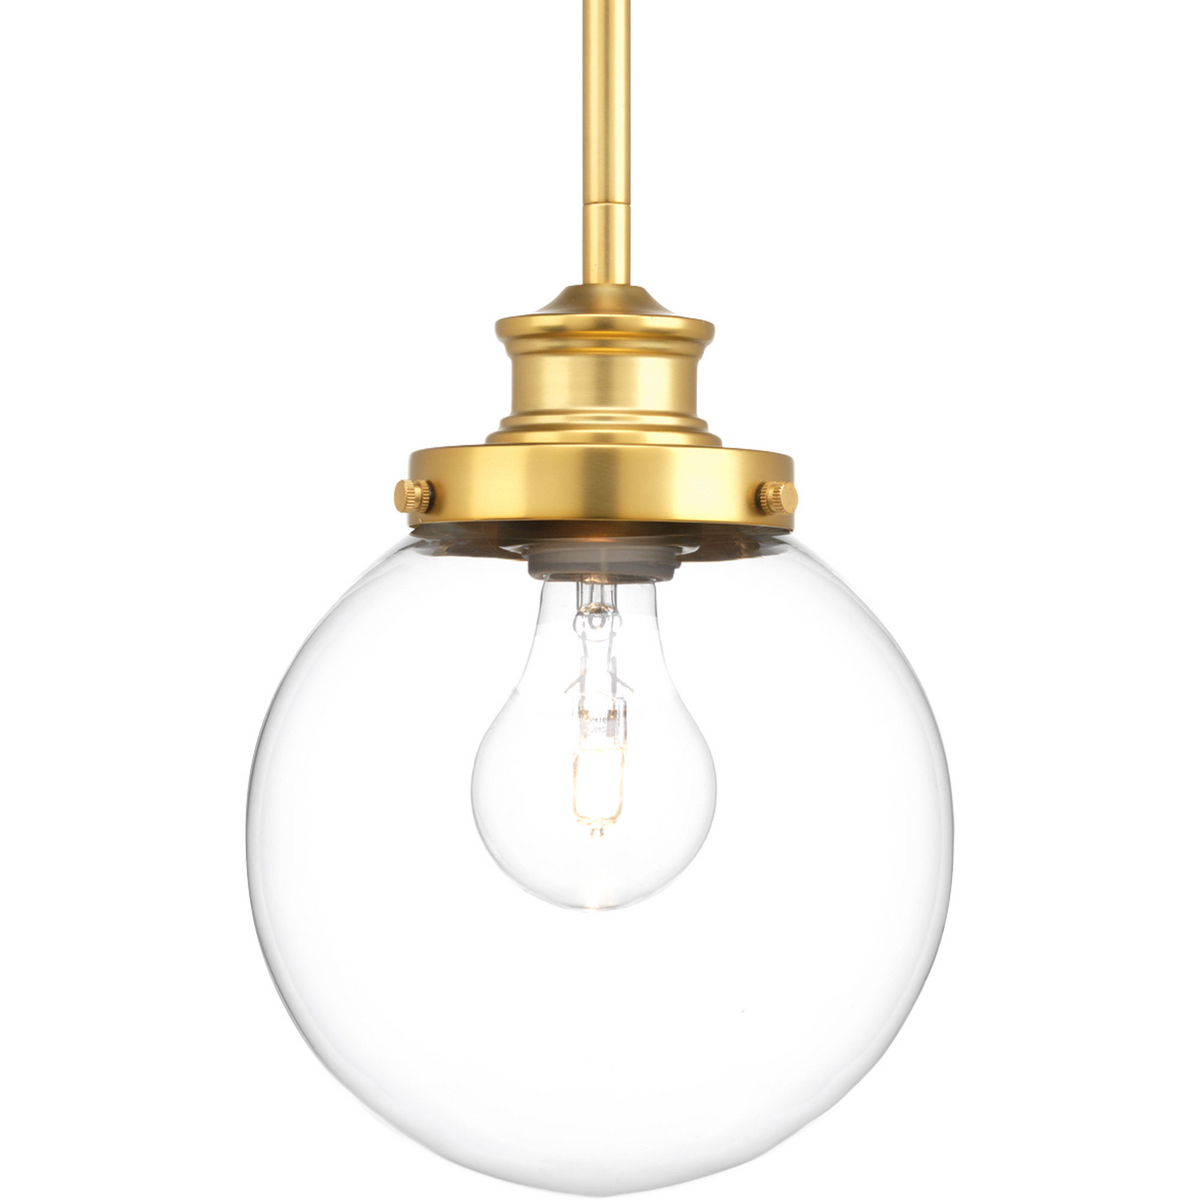 One-light 7 inch Pendant with a modern take on vintage electric design with a clear glass sphere. Natural Brass finish.